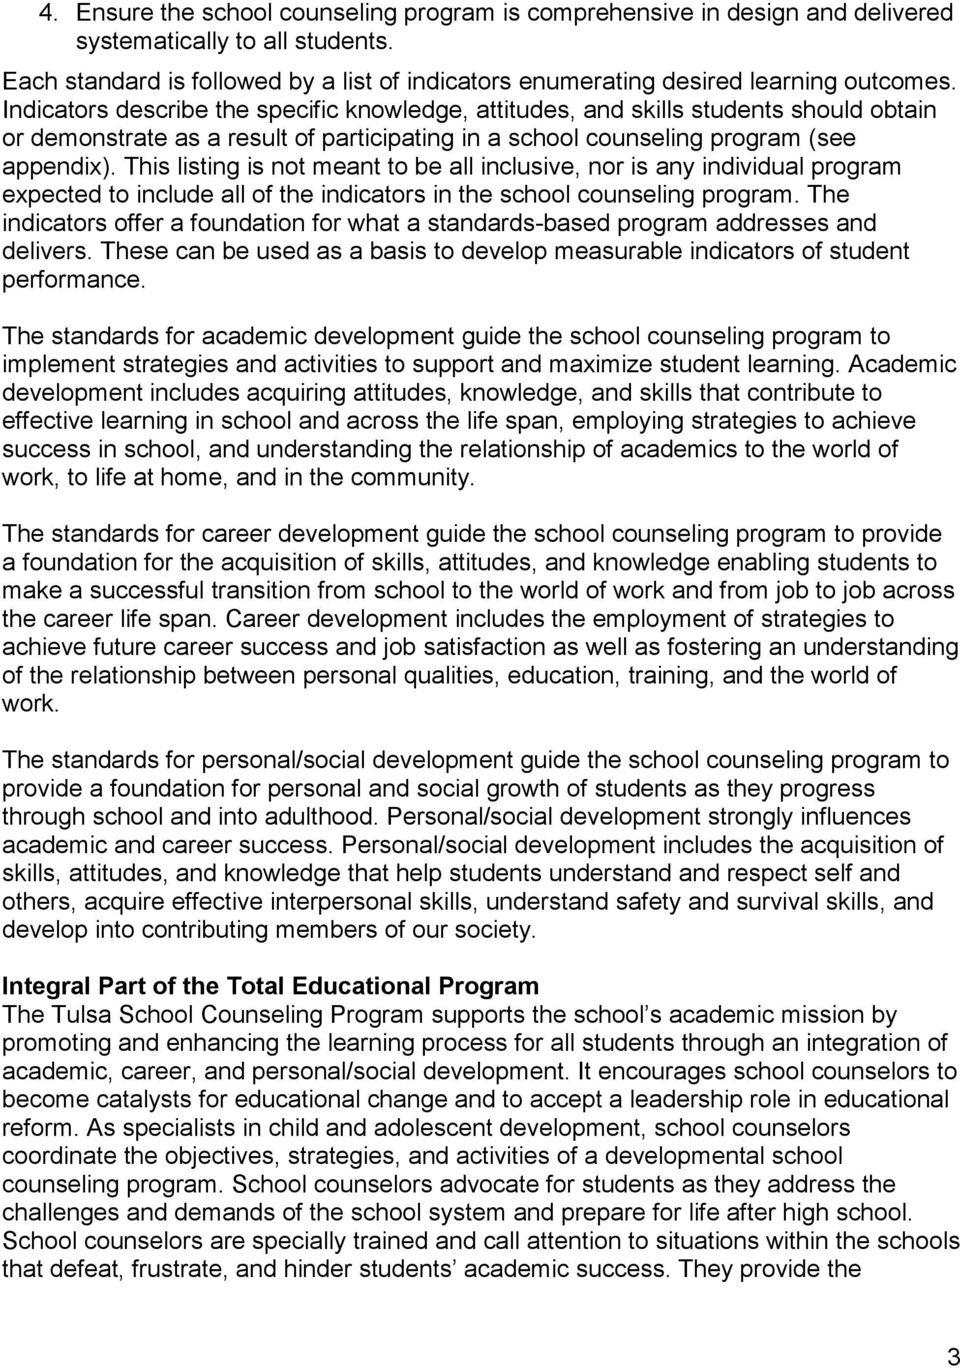 Indicators describe the specific knowledge, attitudes, and skills students should obtain or demonstrate as a result of participating in a school counseling program (see appendix).